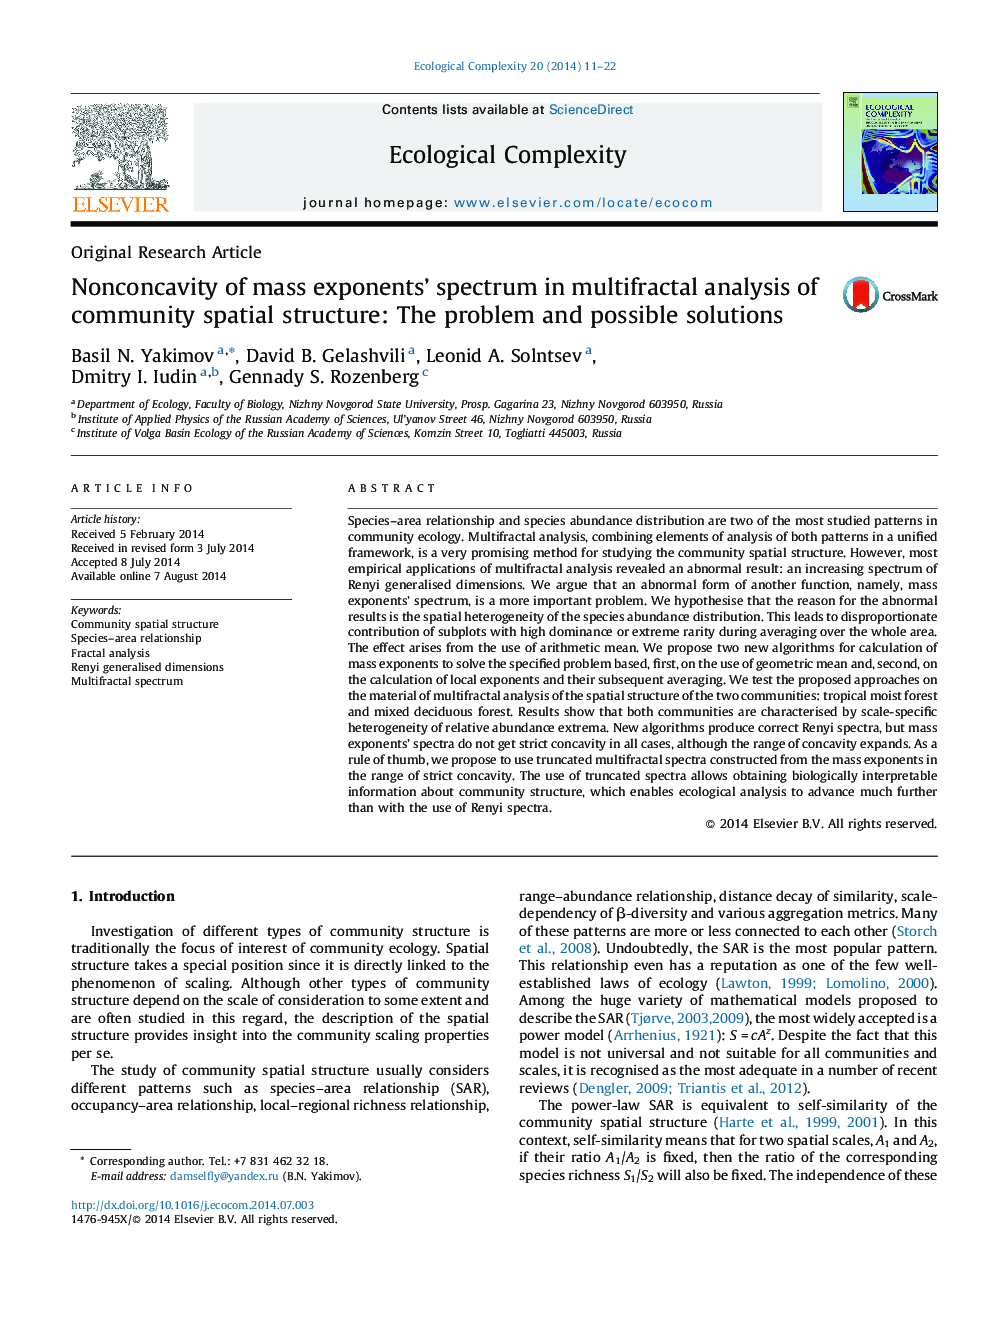 Nonconcavity of mass exponents’ spectrum in multifractal analysis of community spatial structure: The problem and possible solutions